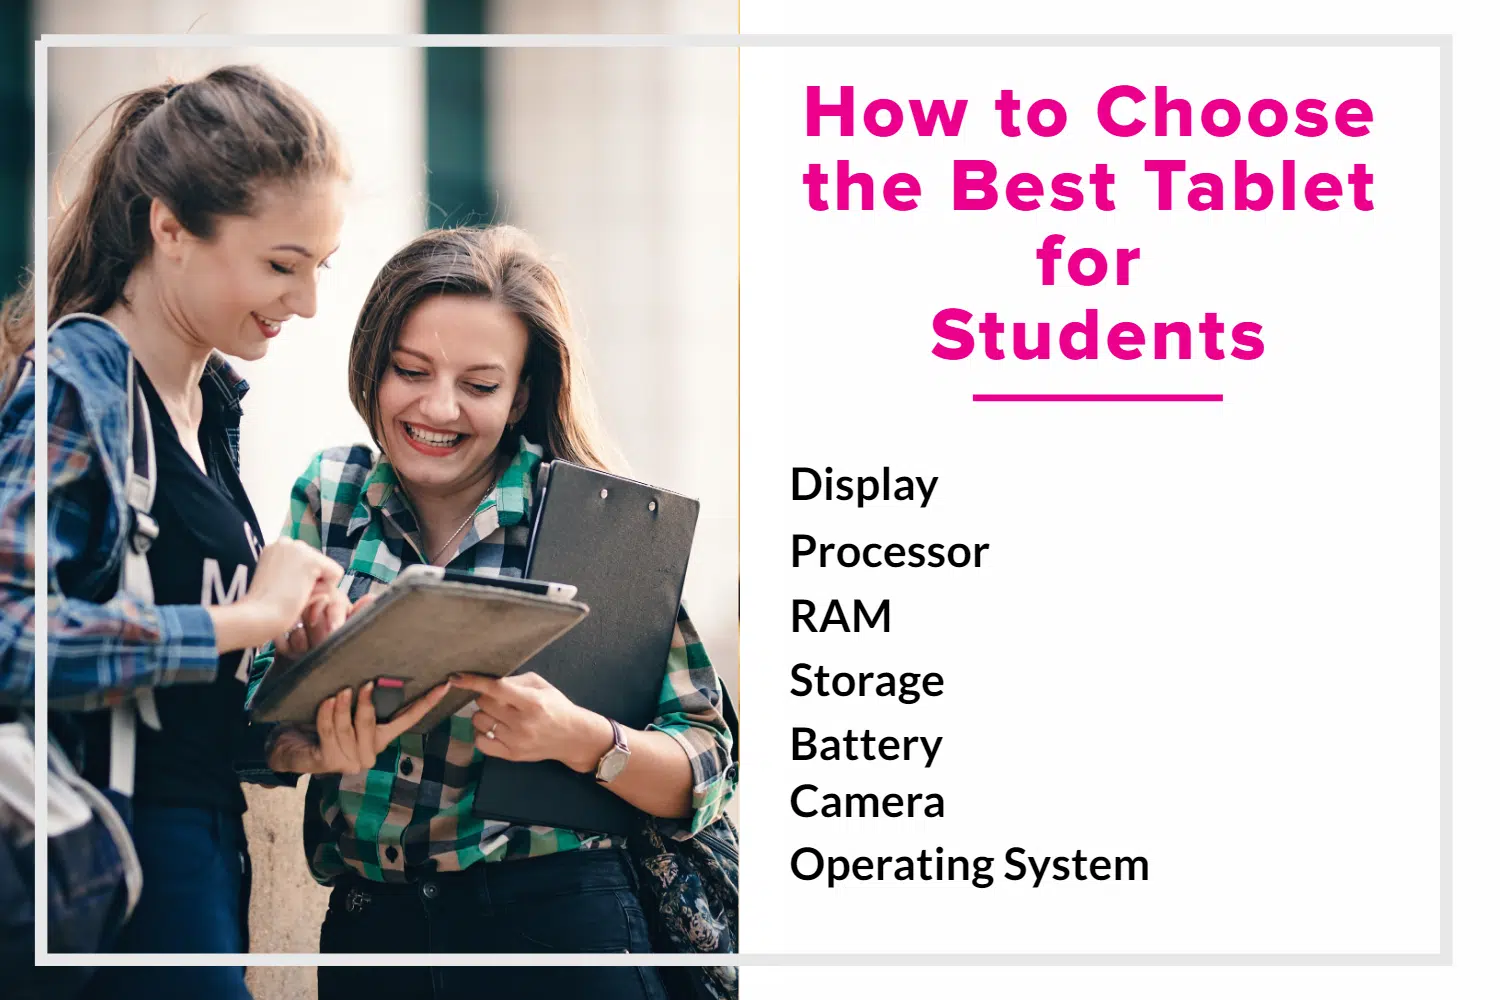 How to Choose the Best Tablet for Students